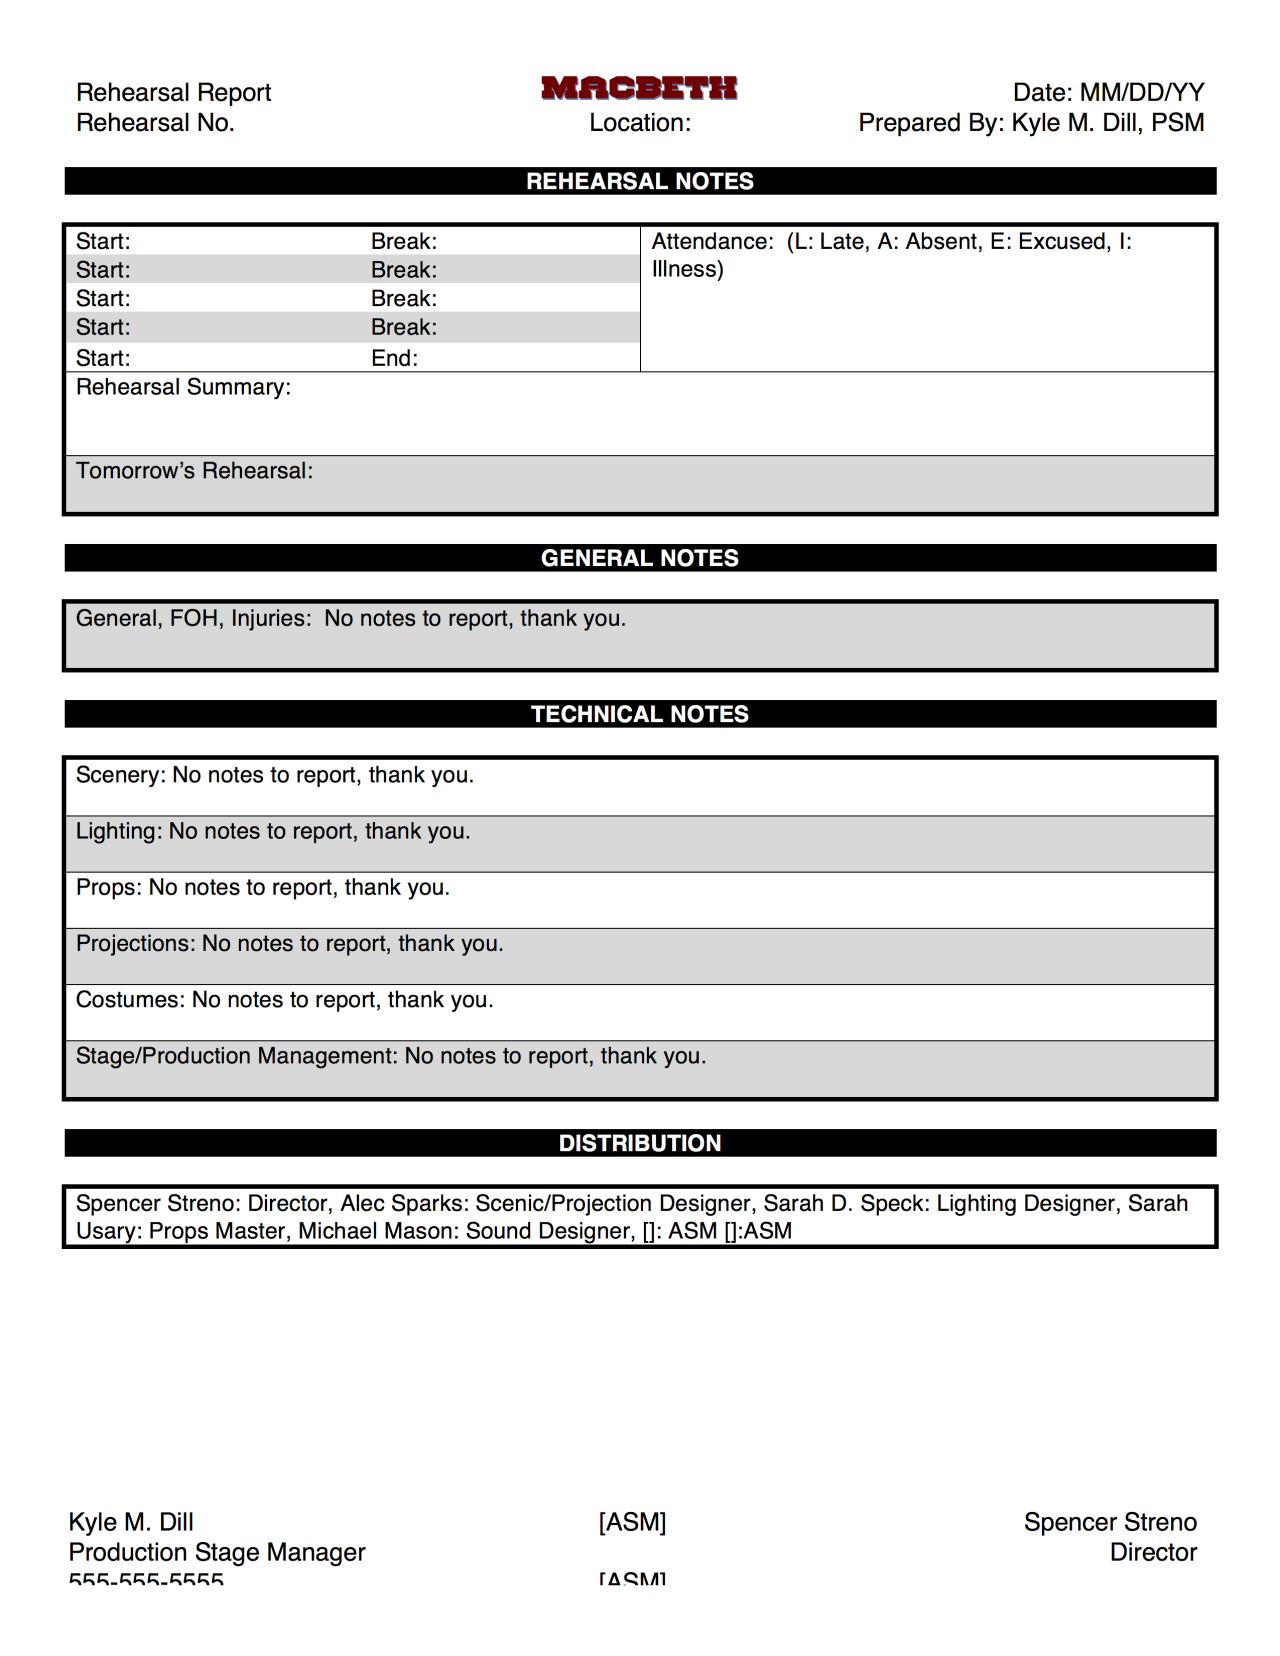 Macbeth@su Production Blog — Here's The Template For Our Regarding Rehearsal Report Template